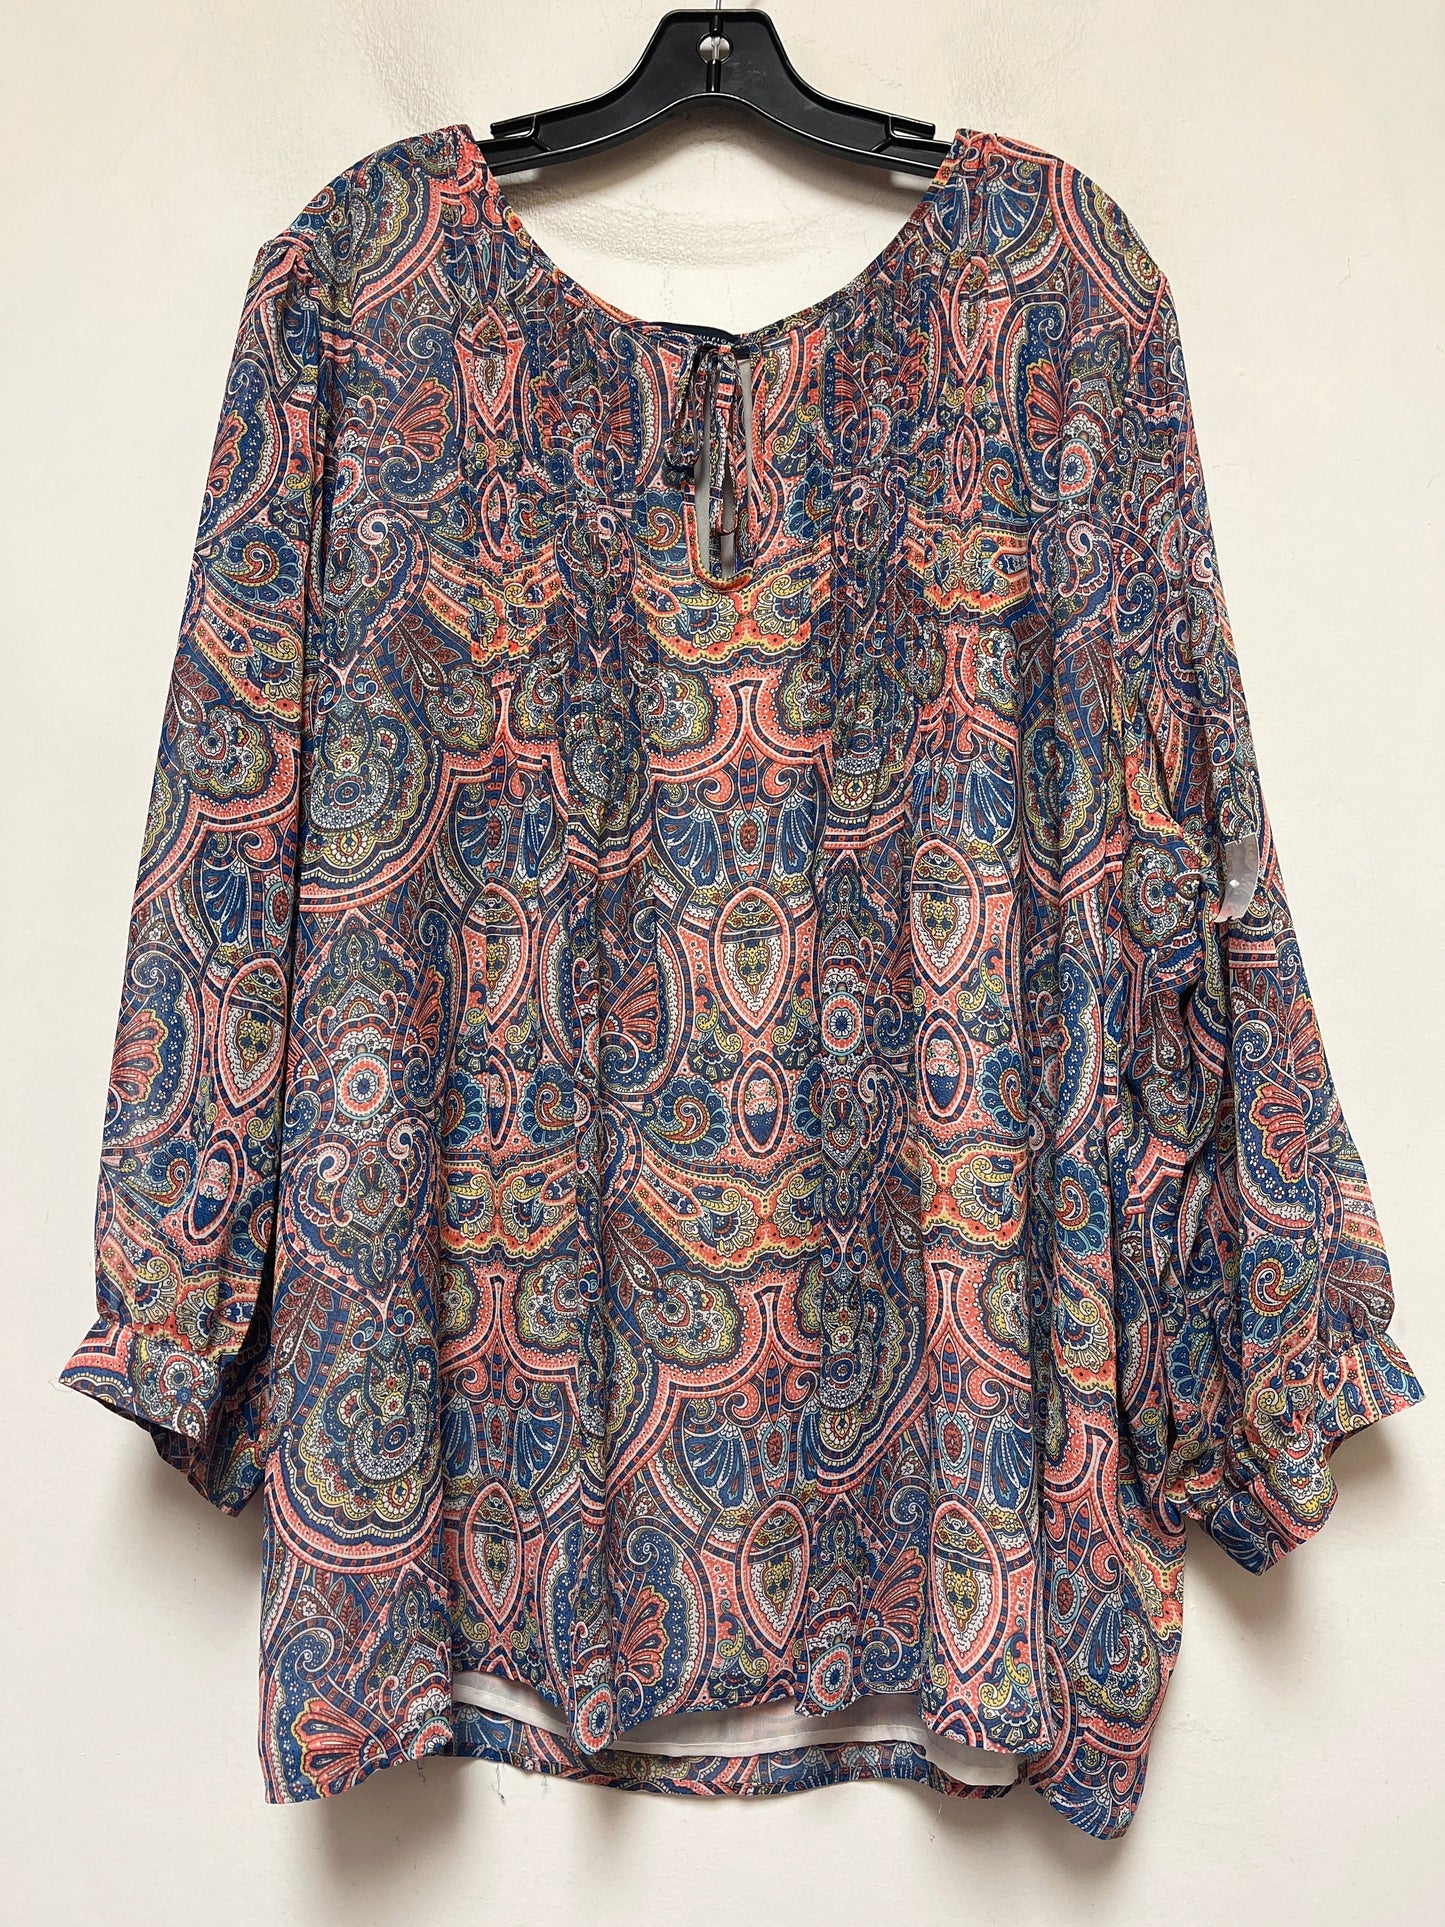 Paisley Print Top Long Sleeve Tommy Hilfiger, Size 3x